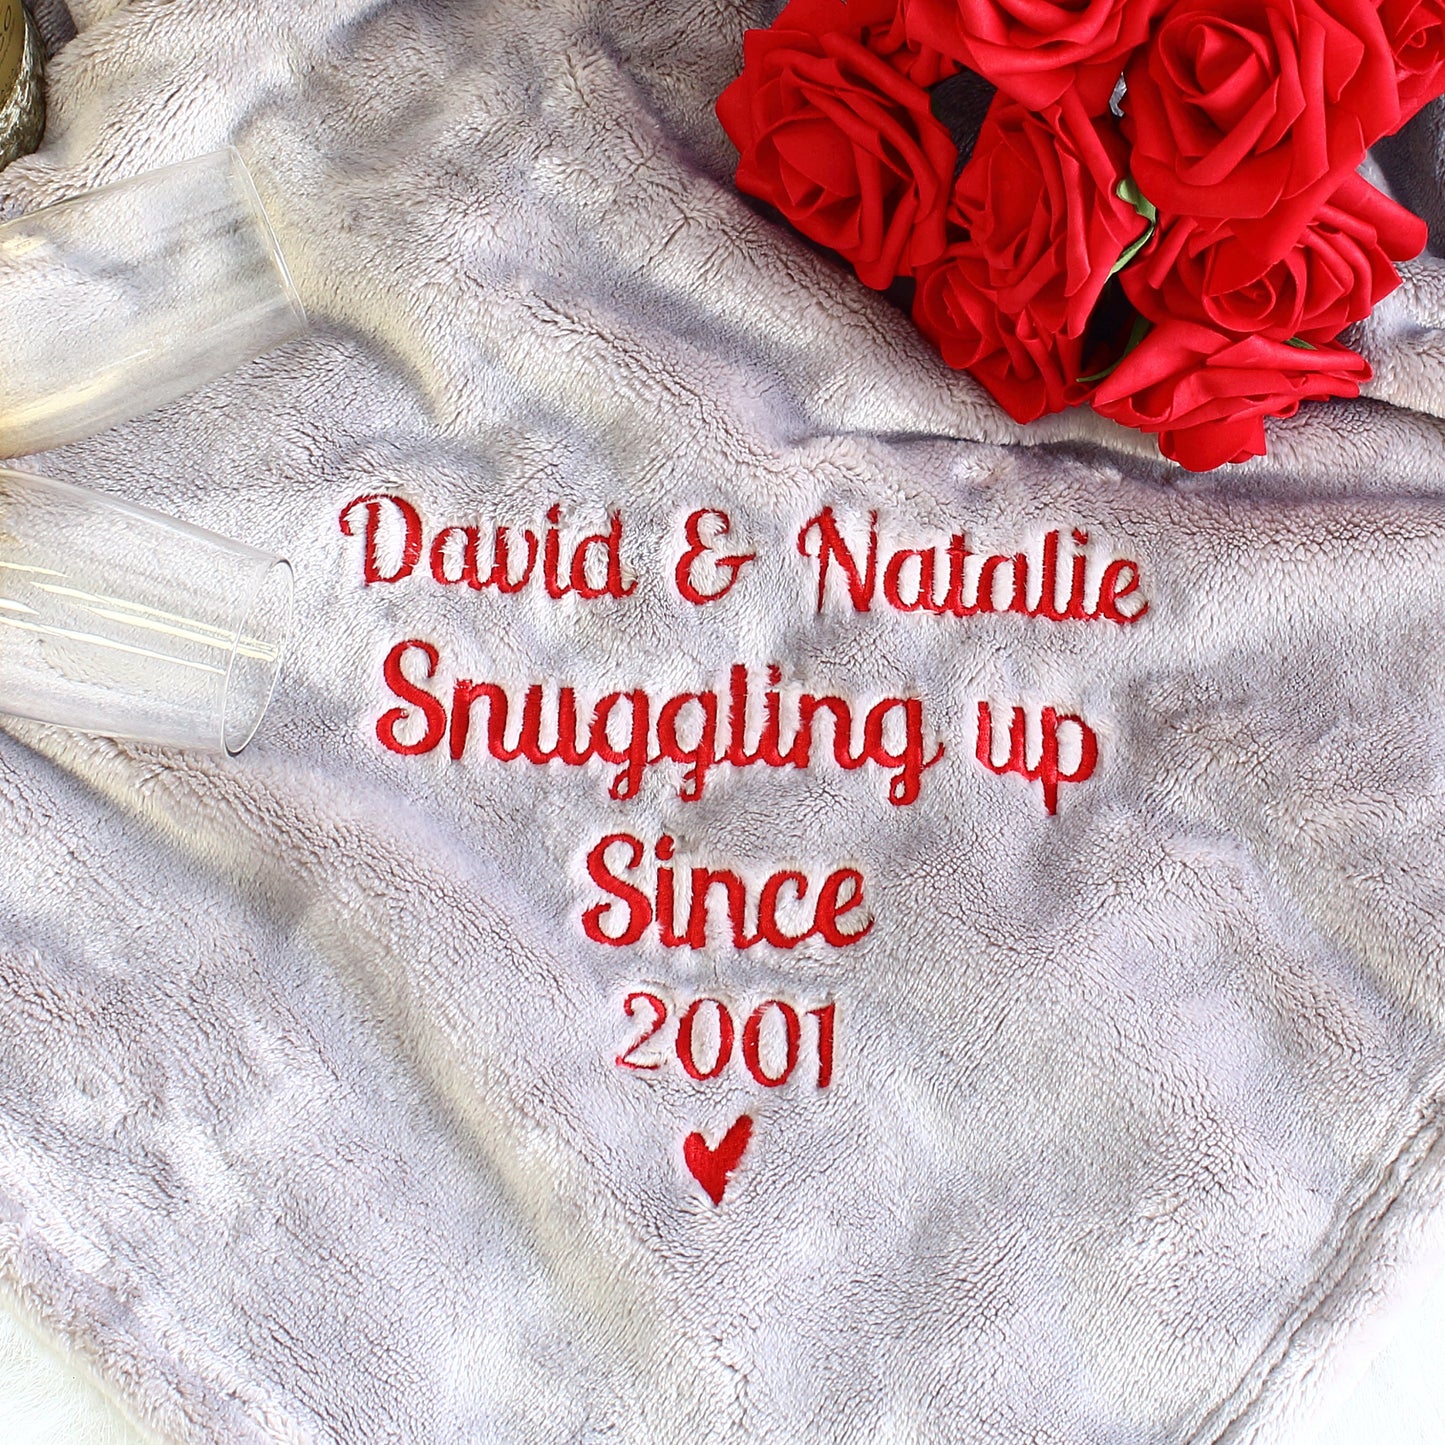 NEW - Embroidered Blanket - Snuggling up since